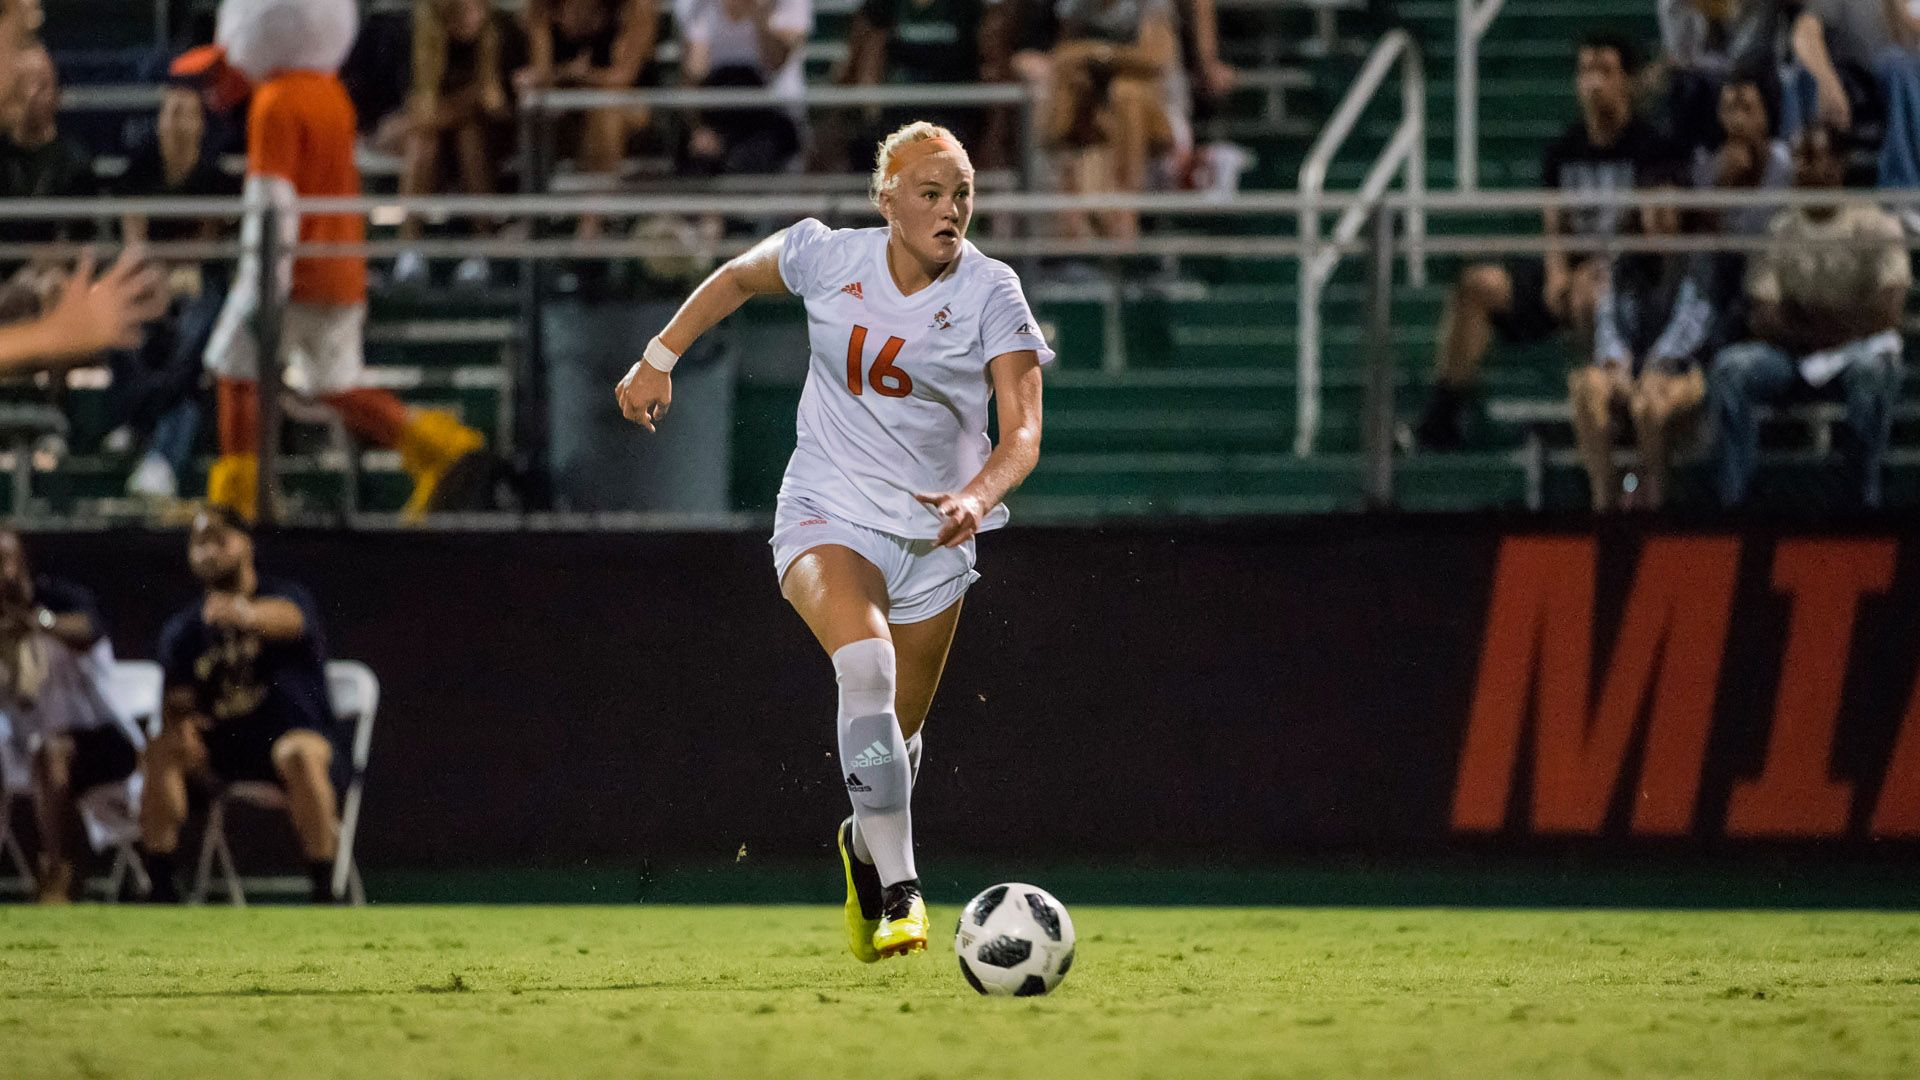 Canes Fall in Overtime at Clemson, 2-1